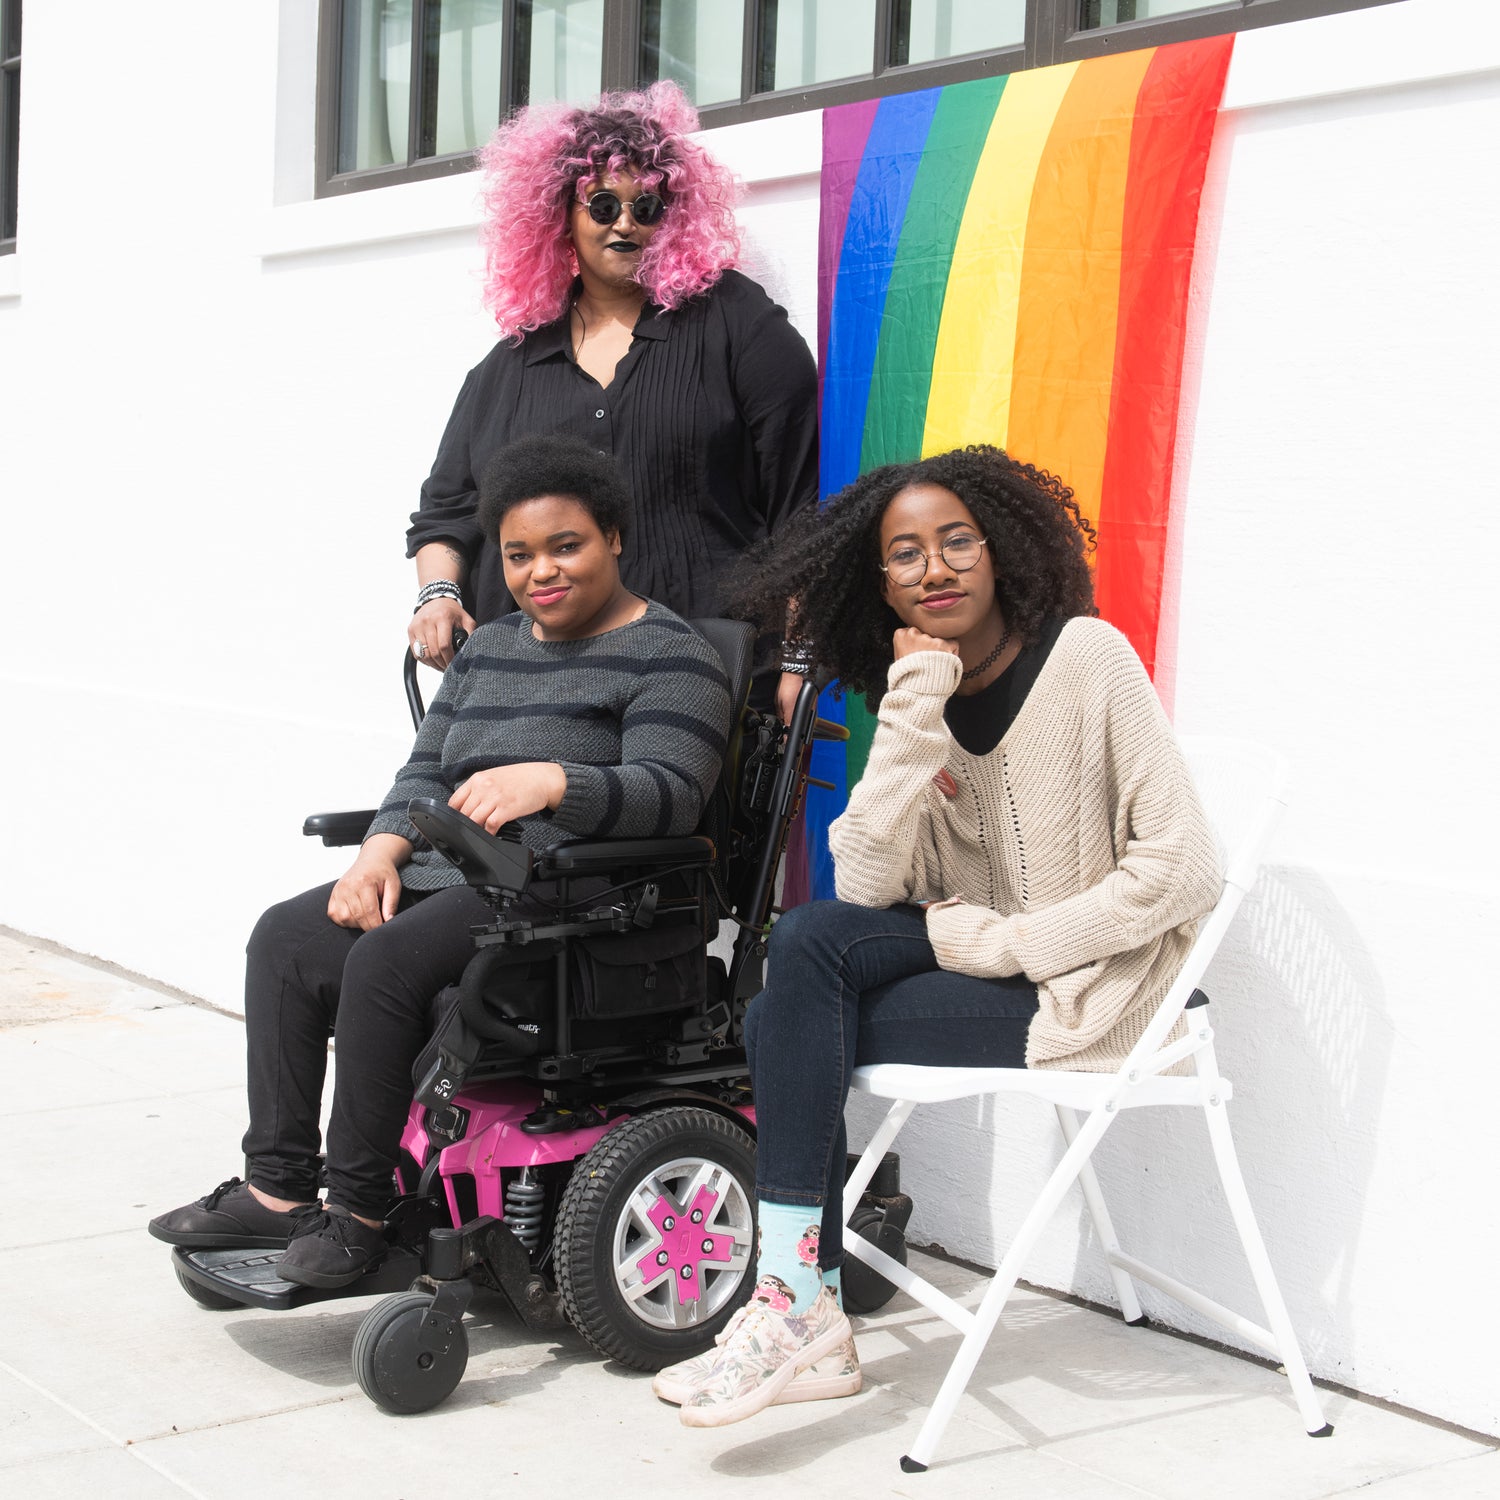 Three Black and disabled folx (a non-binary person holding a cane, a non-binary person sitting in a power wheelchair, and a femme sitting in a chair) casually smile at the camera while a rainbow pride flag drapes on the wall behind them.